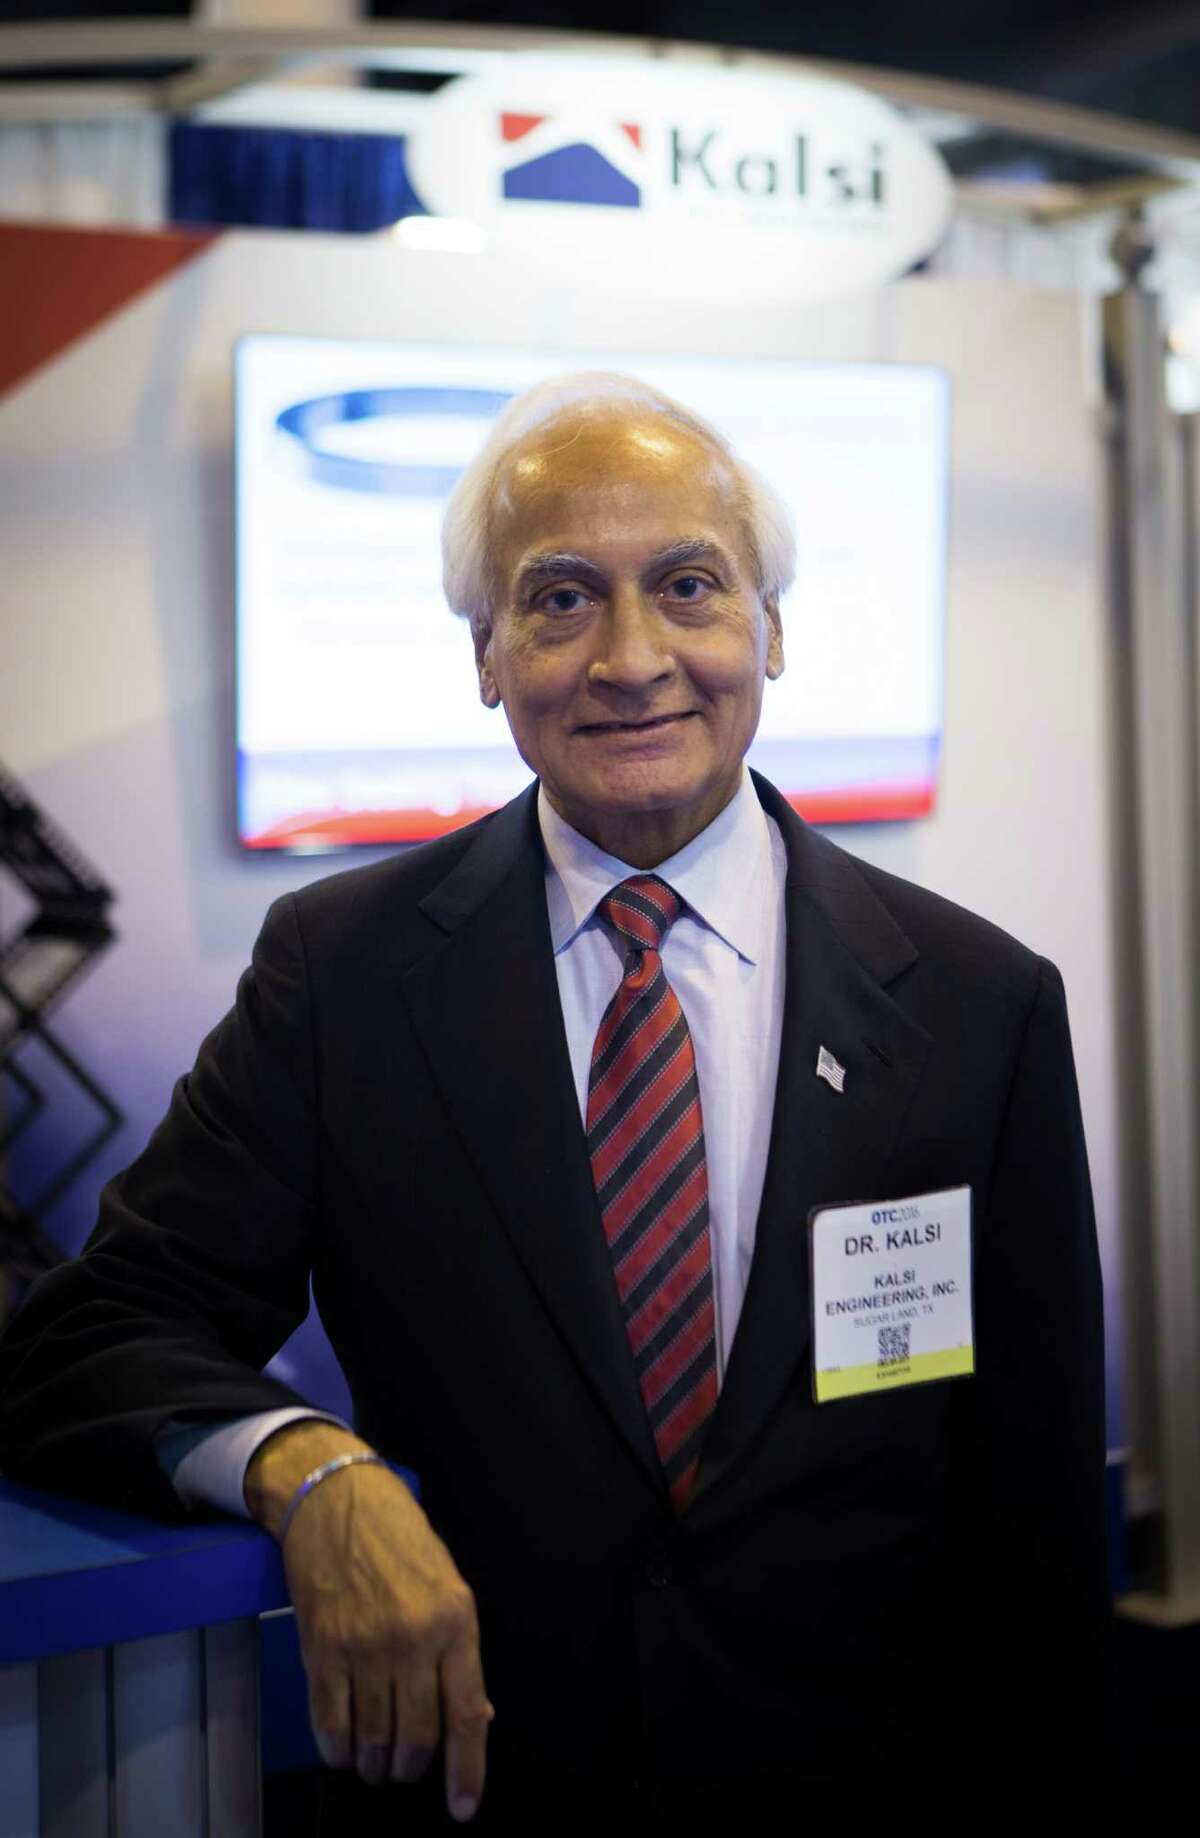 Dr. M.S Kalsi founder of Kalsi Engineering says his company has seen a 50 percent drop in revenue since the oil price collapsed, but his company is in good health due to conservative business practices. Tuesday, May 3, 2016, in Houston. ( Marie D. De Jesus / Houston Chronicle )